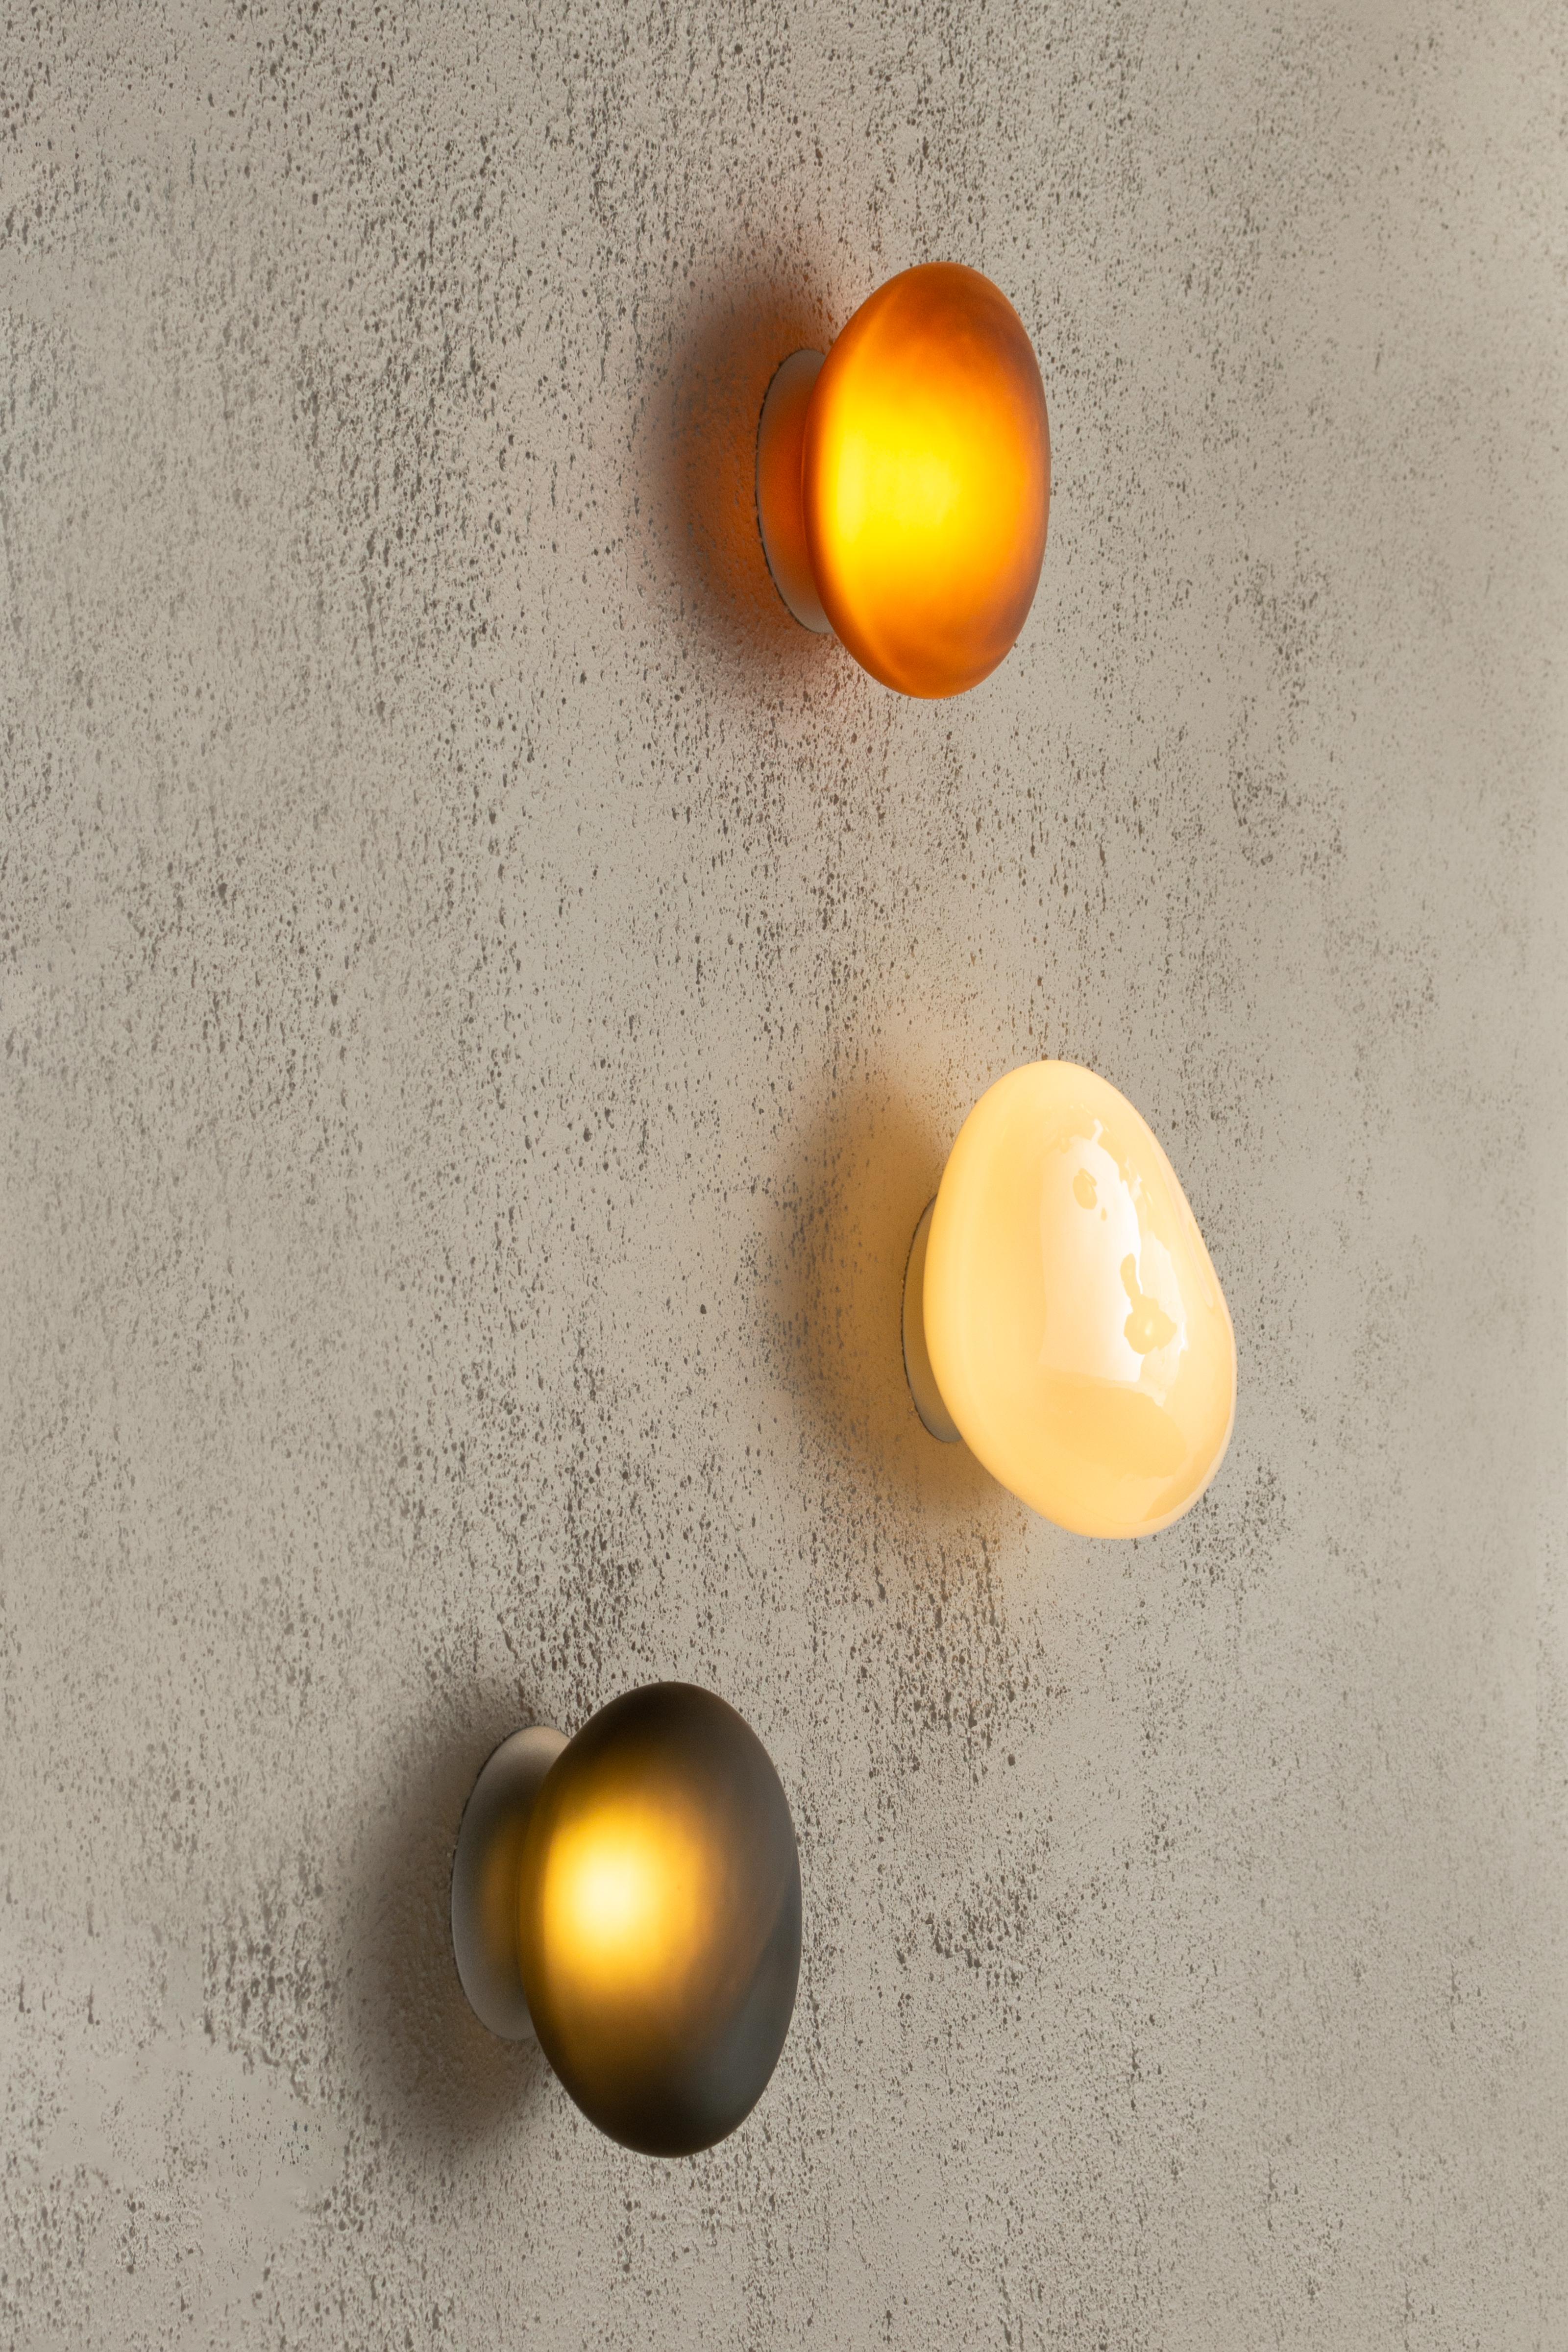 Contemporary wall lamp pebble 

Electrical : 
Voltage: 110 – 277V / 220 – 240V
Integral LED source : 1 x 9W LED

The model shown in picture:
Dimensions: A: 30.5 x 21 x 18 cm 
Color: Citrine
______
Pebble
The Pebble series celebrates the